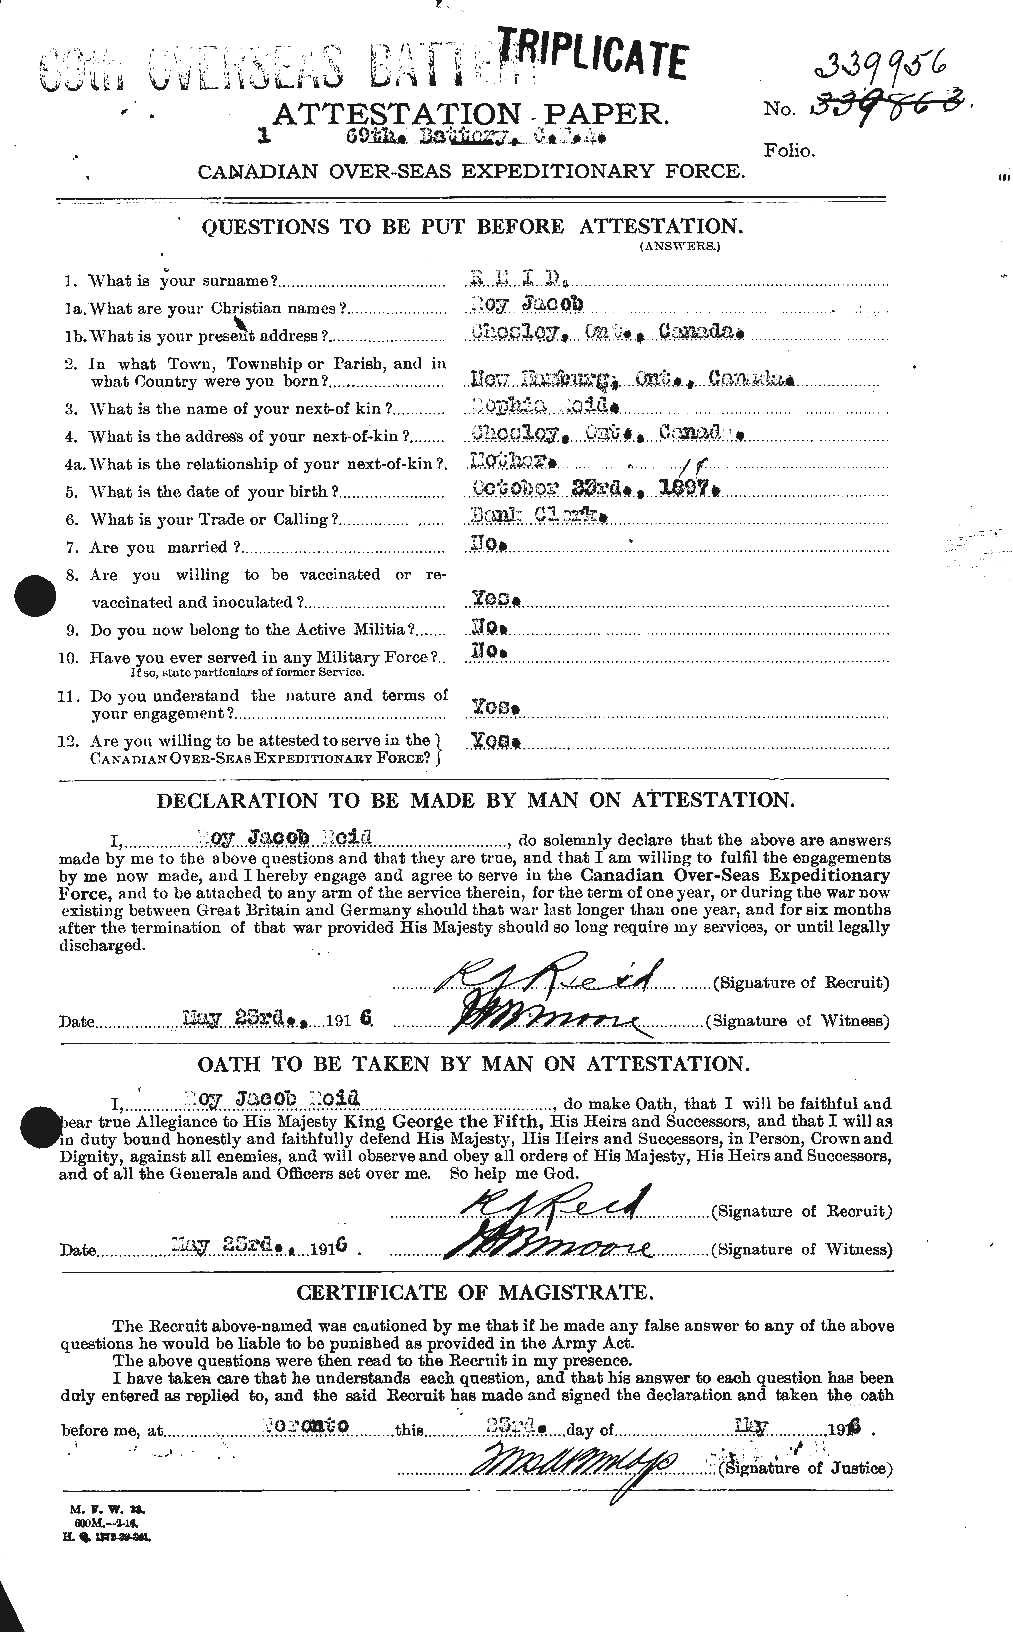 Personnel Records of the First World War - CEF 601937a